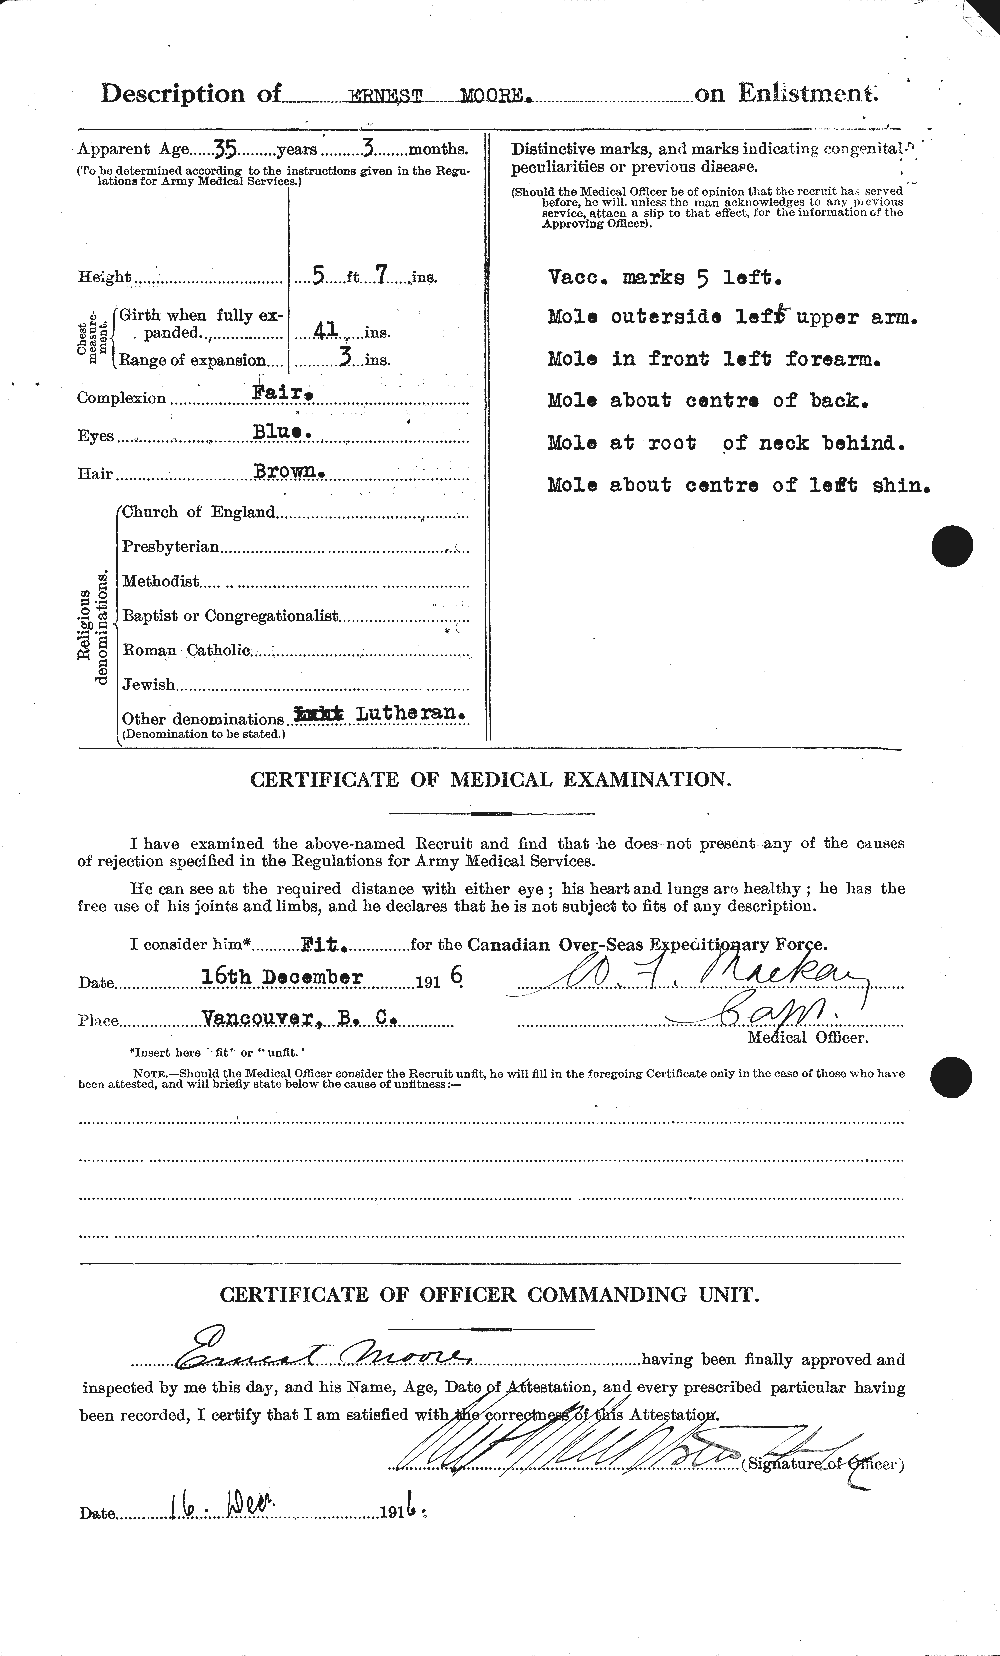 Personnel Records of the First World War - CEF 506664b